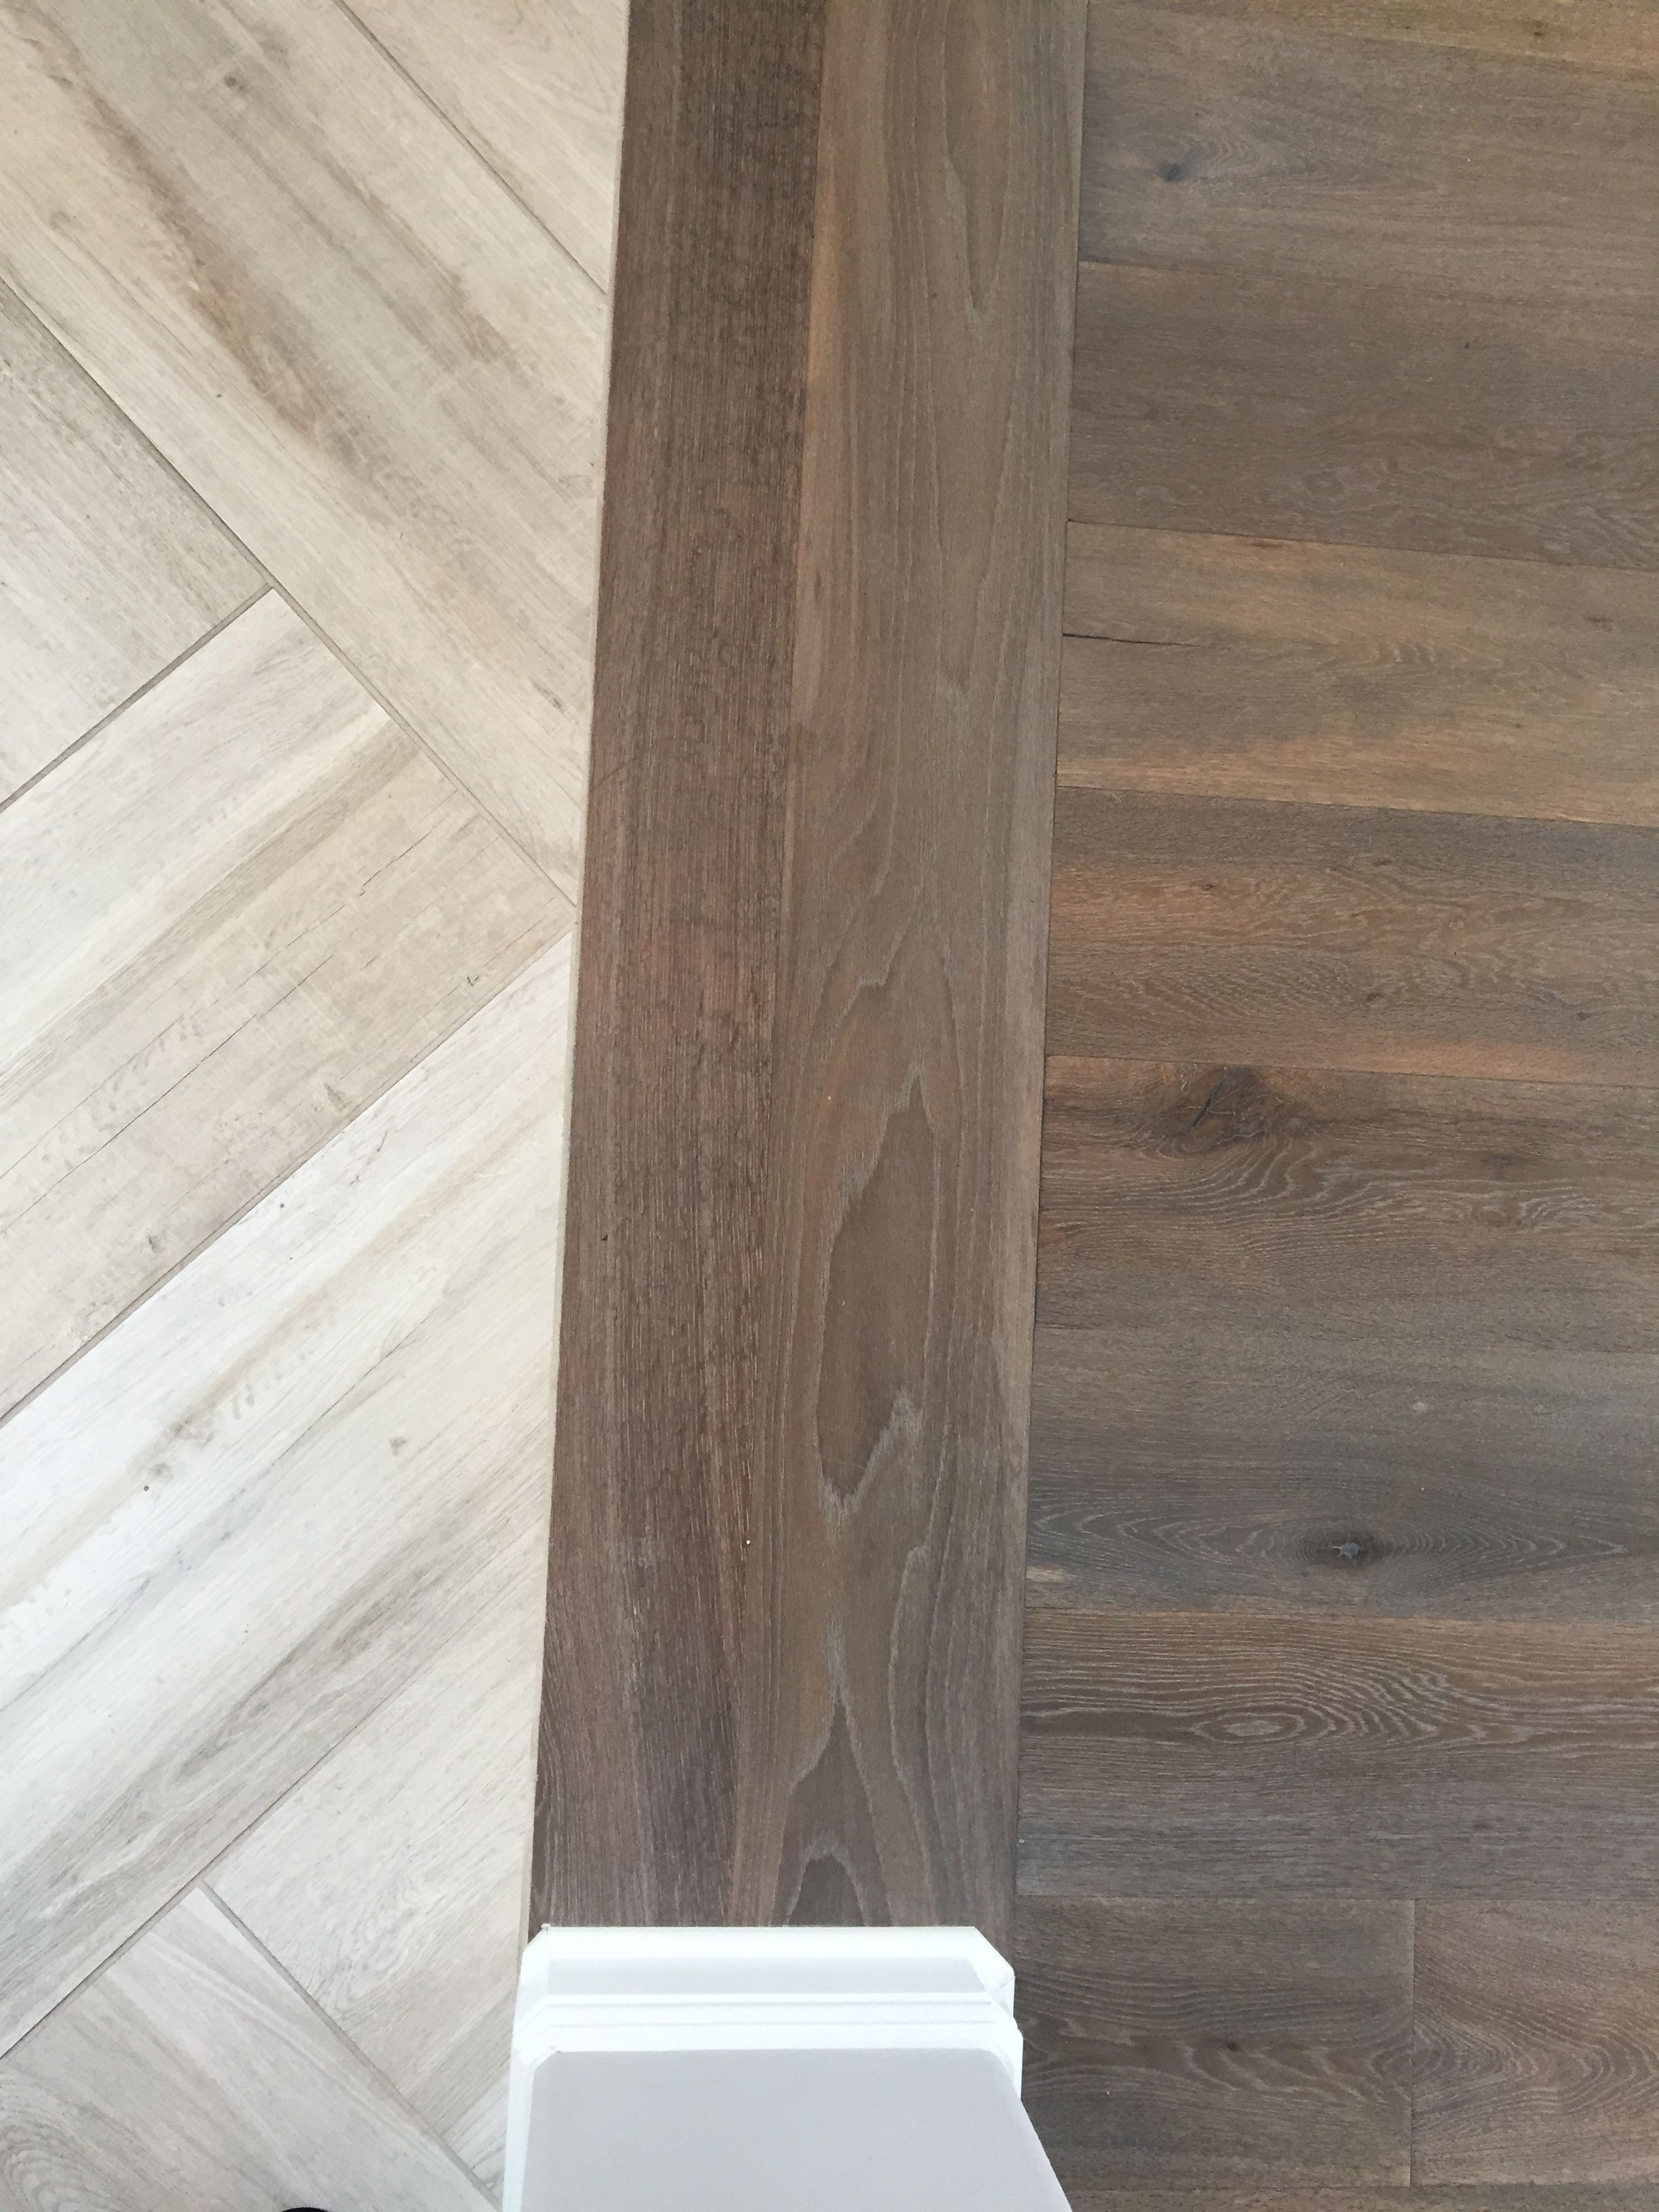 13 Cute Hardwood Floor and Tile Transition 2024 free download hardwood floor and tile transition of how to make wood stain fresh floor transition laminate to in how to make wood stain fresh floor transition laminate to herringbone tile pattern